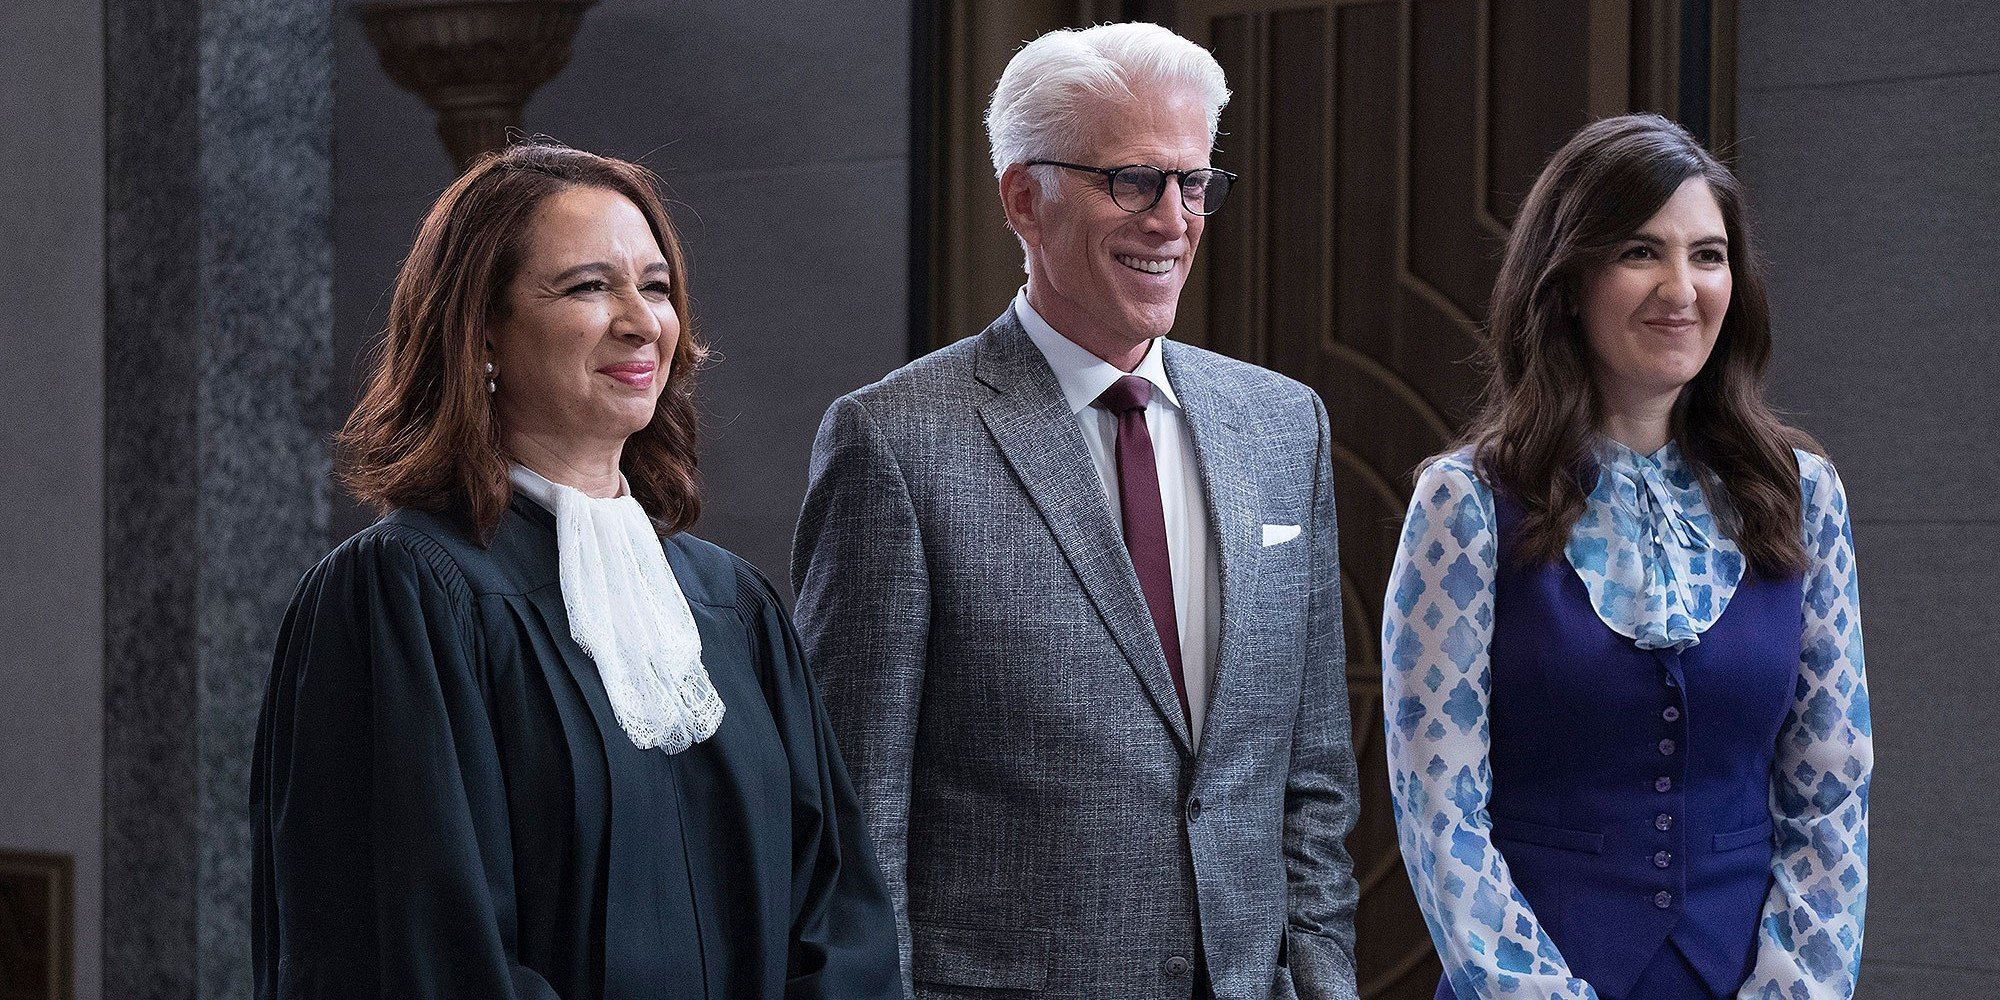 The Good Place Season 2 Finale Maya Rudolph Ted Danson D'Arcy Carden